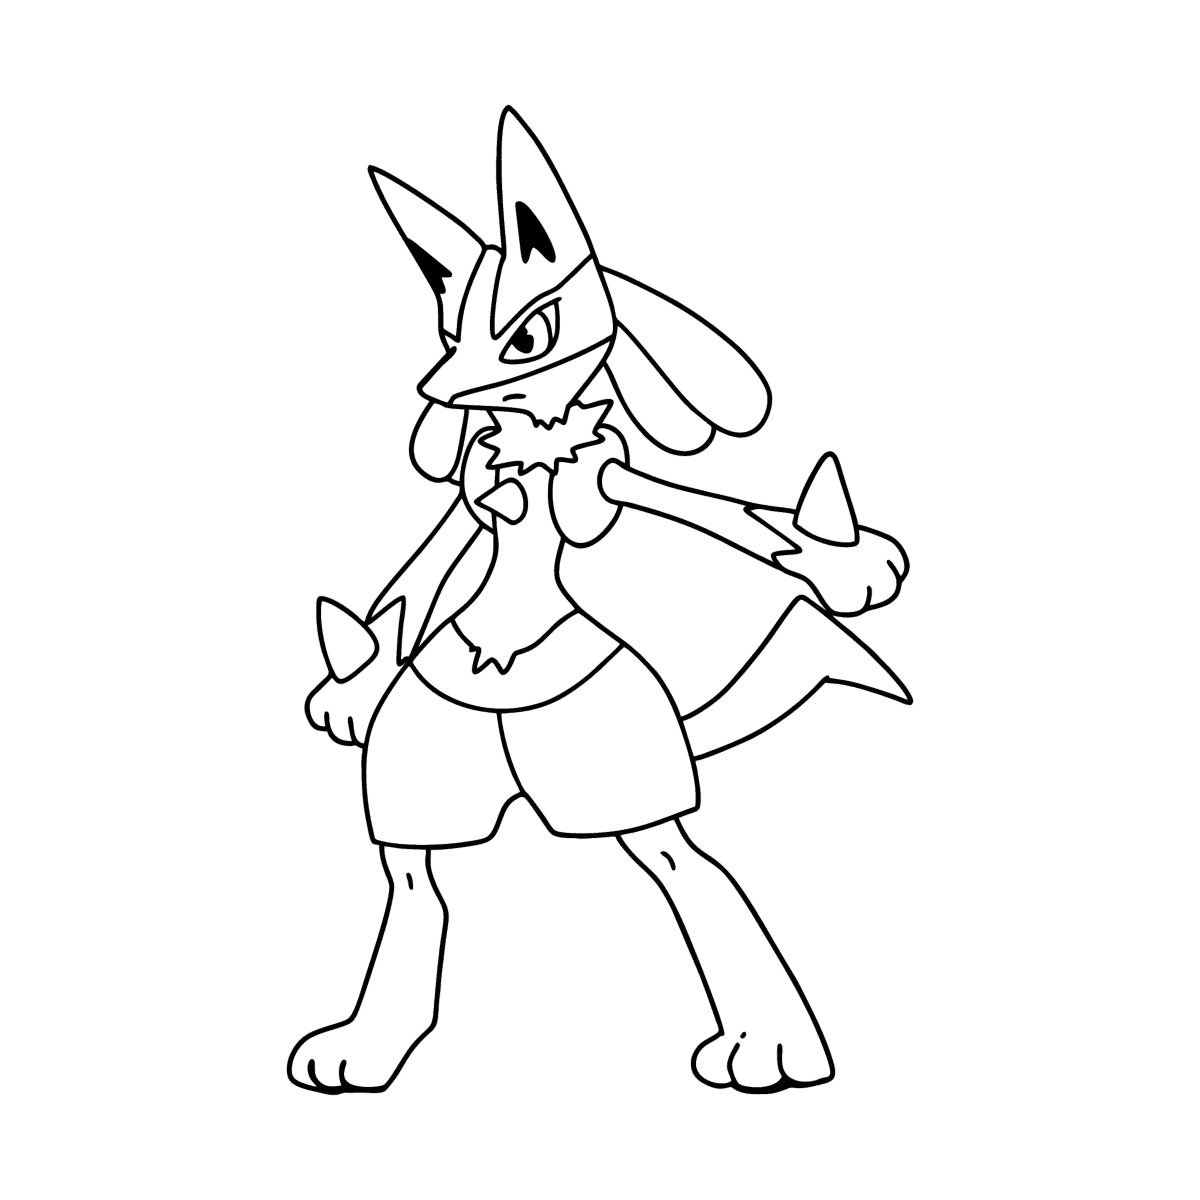 Coloring page pokemon go lucario â online and print for free